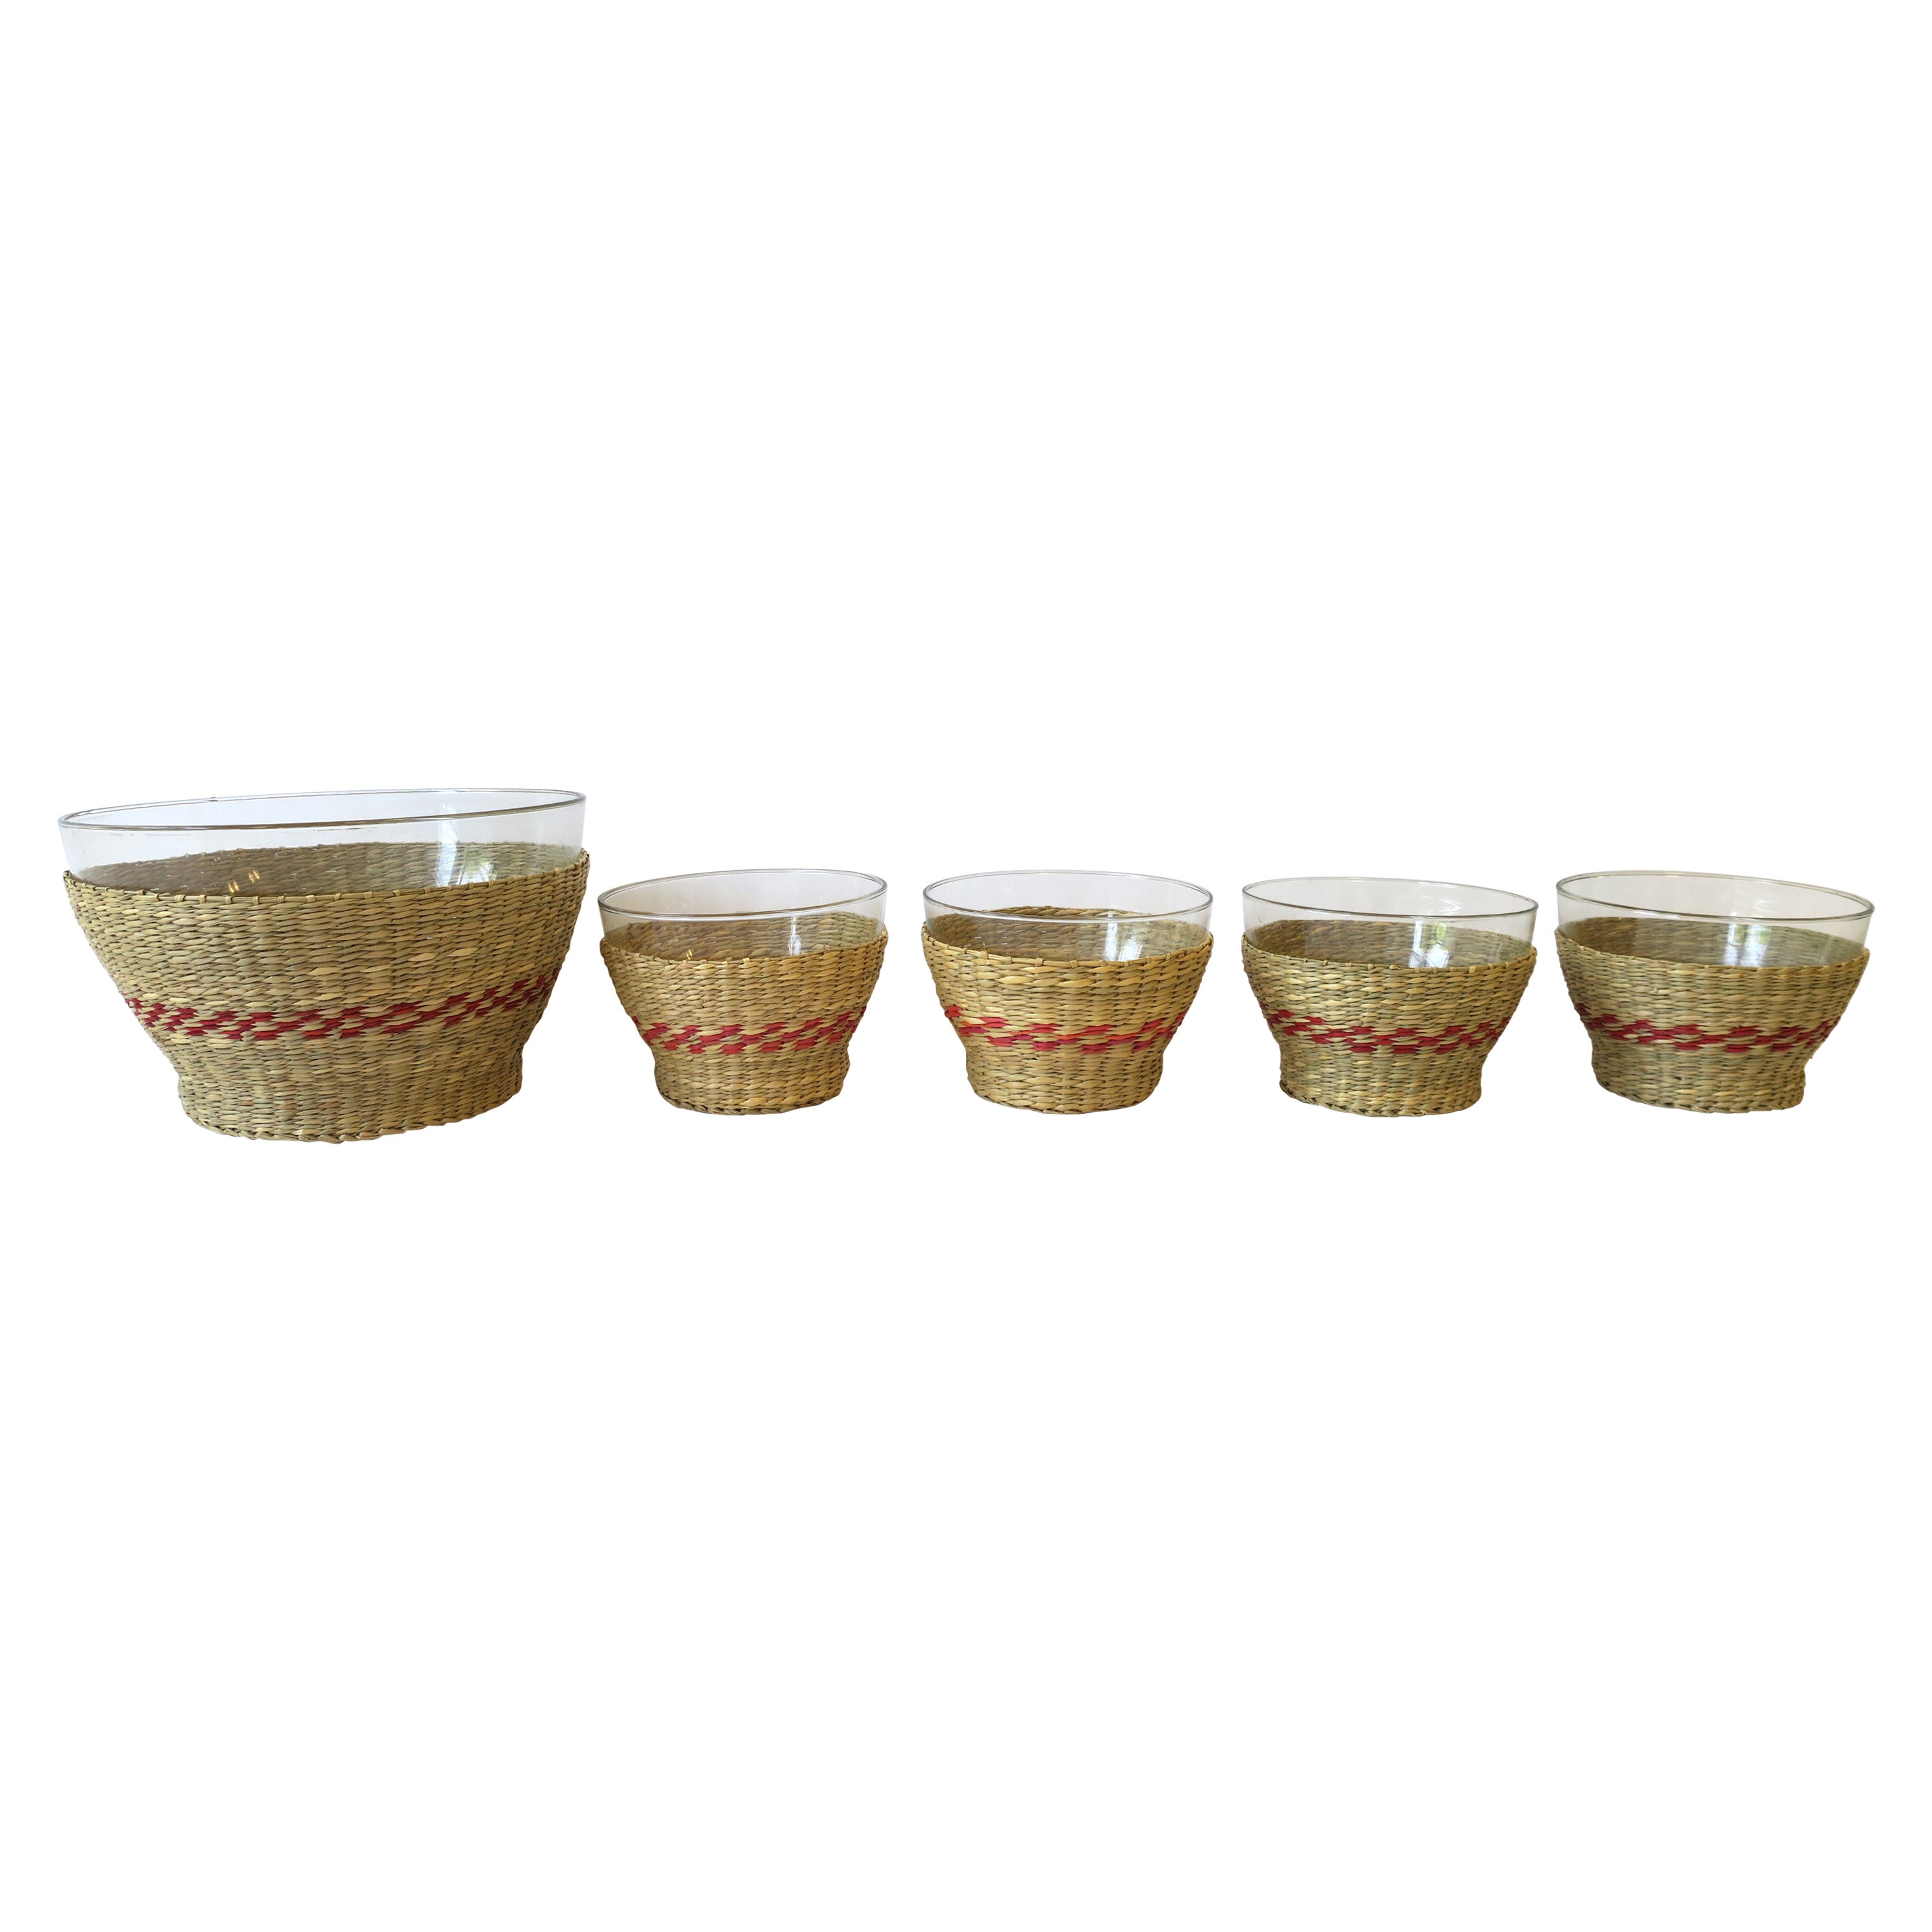 Wicker and Glass Bowls, Set of 5